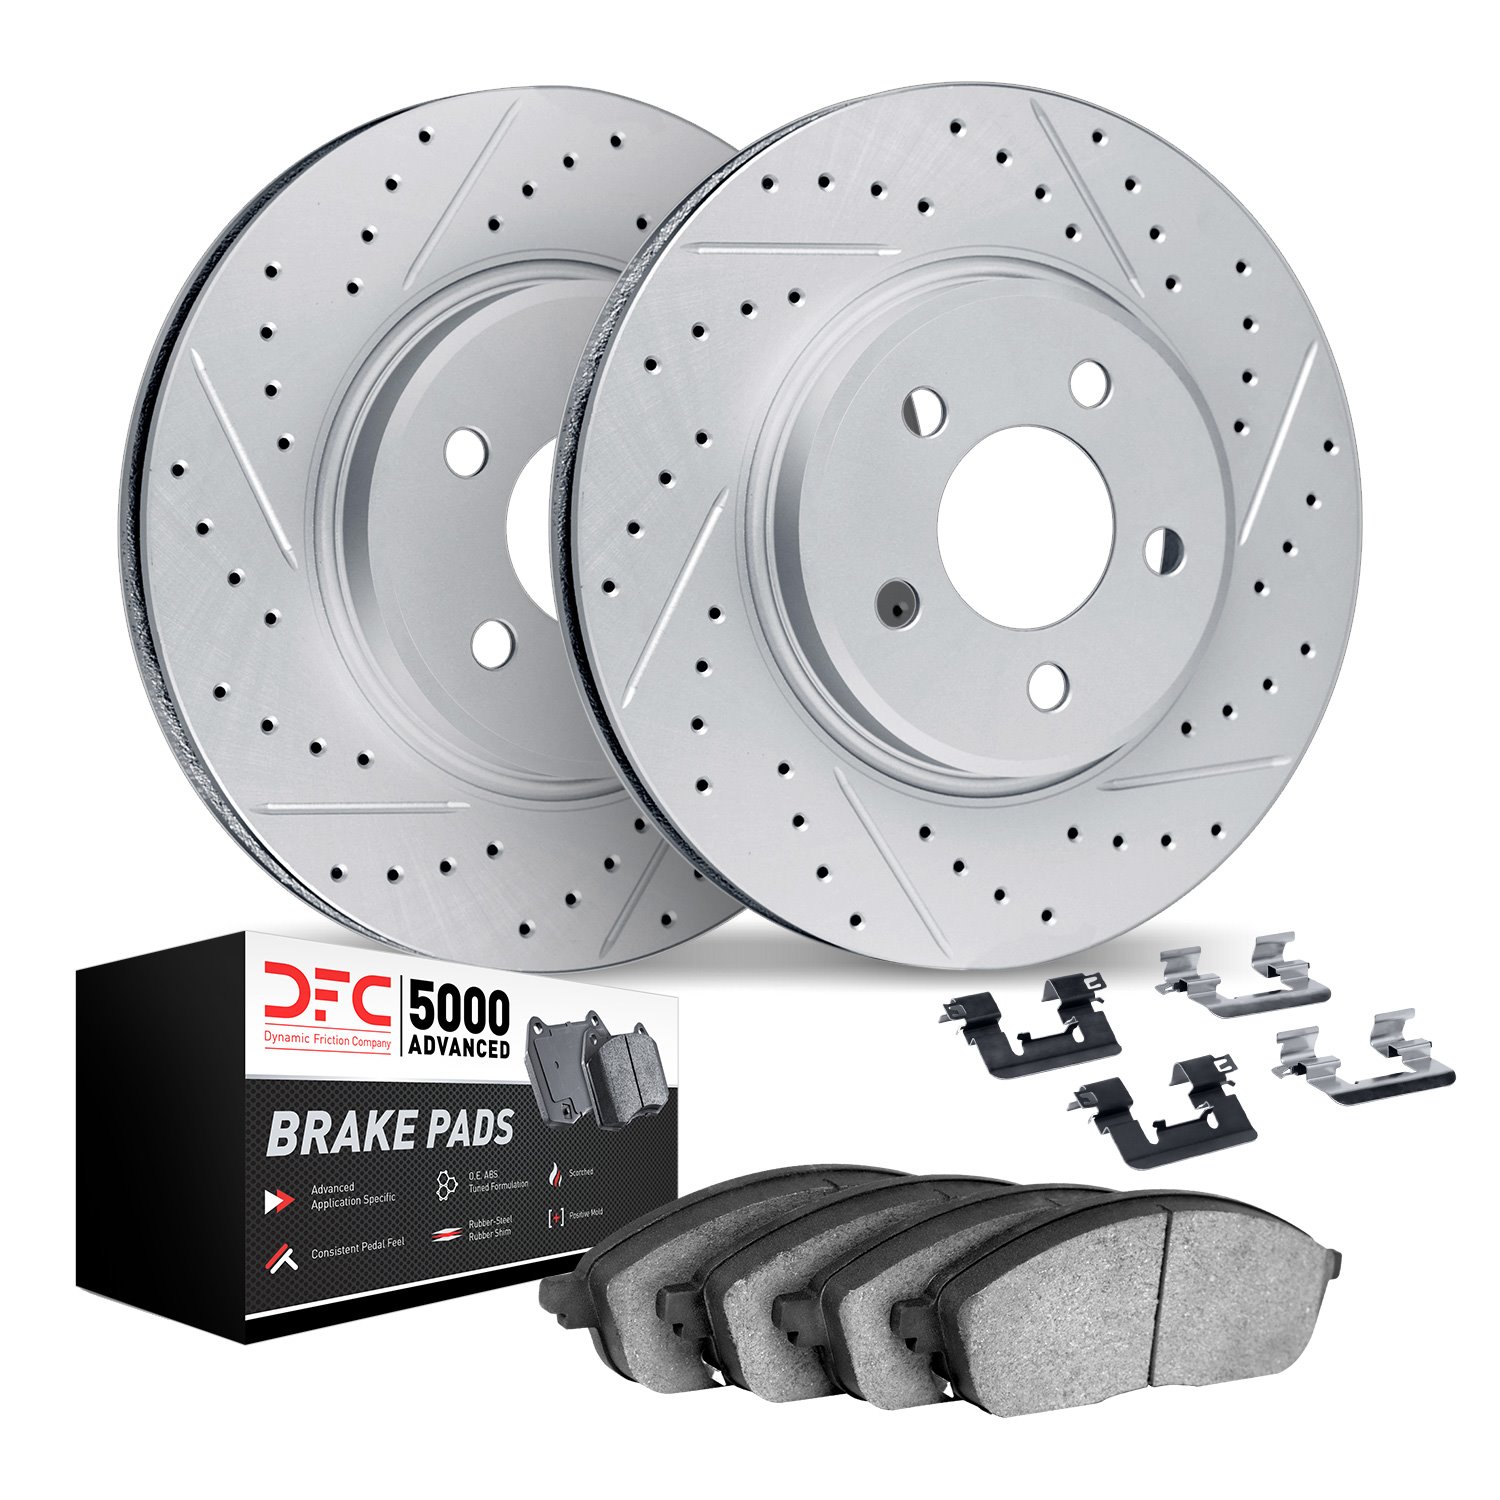 2512-63033 Geoperformance Drilled/Slotted Rotors w/5000 Advanced Brake Pads Kit & Hardware, 2013-2020 Mercedes-Benz, Position: R